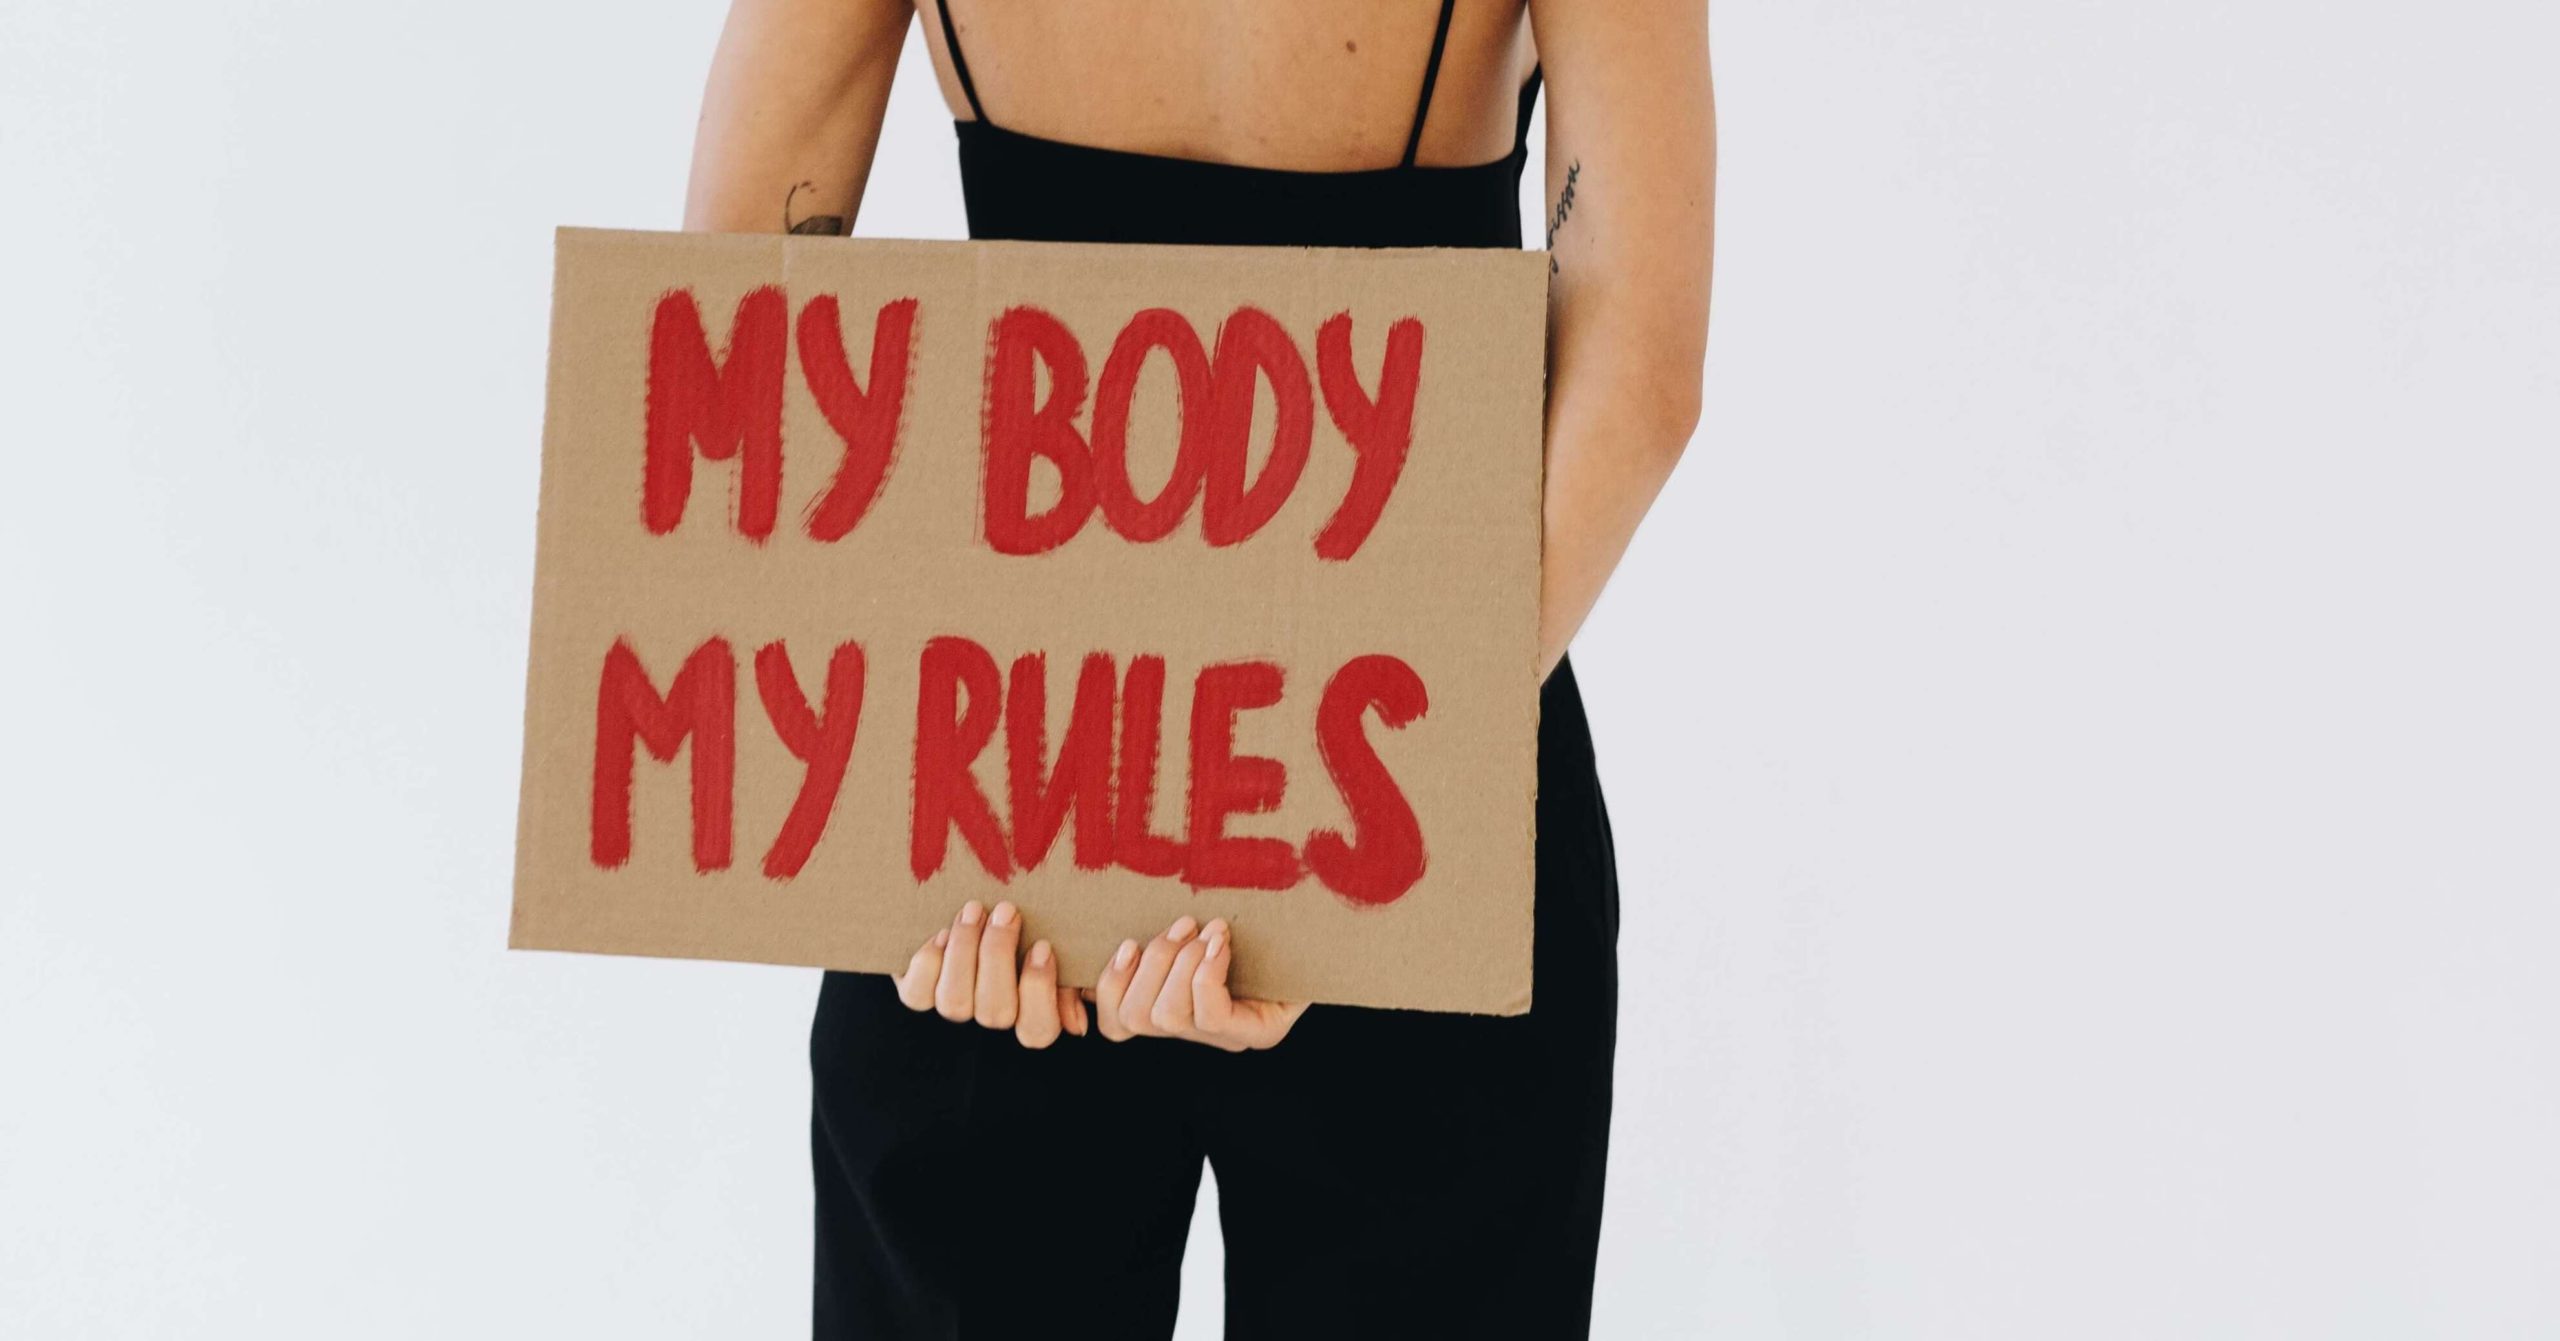 My Body My Rules featured 2022